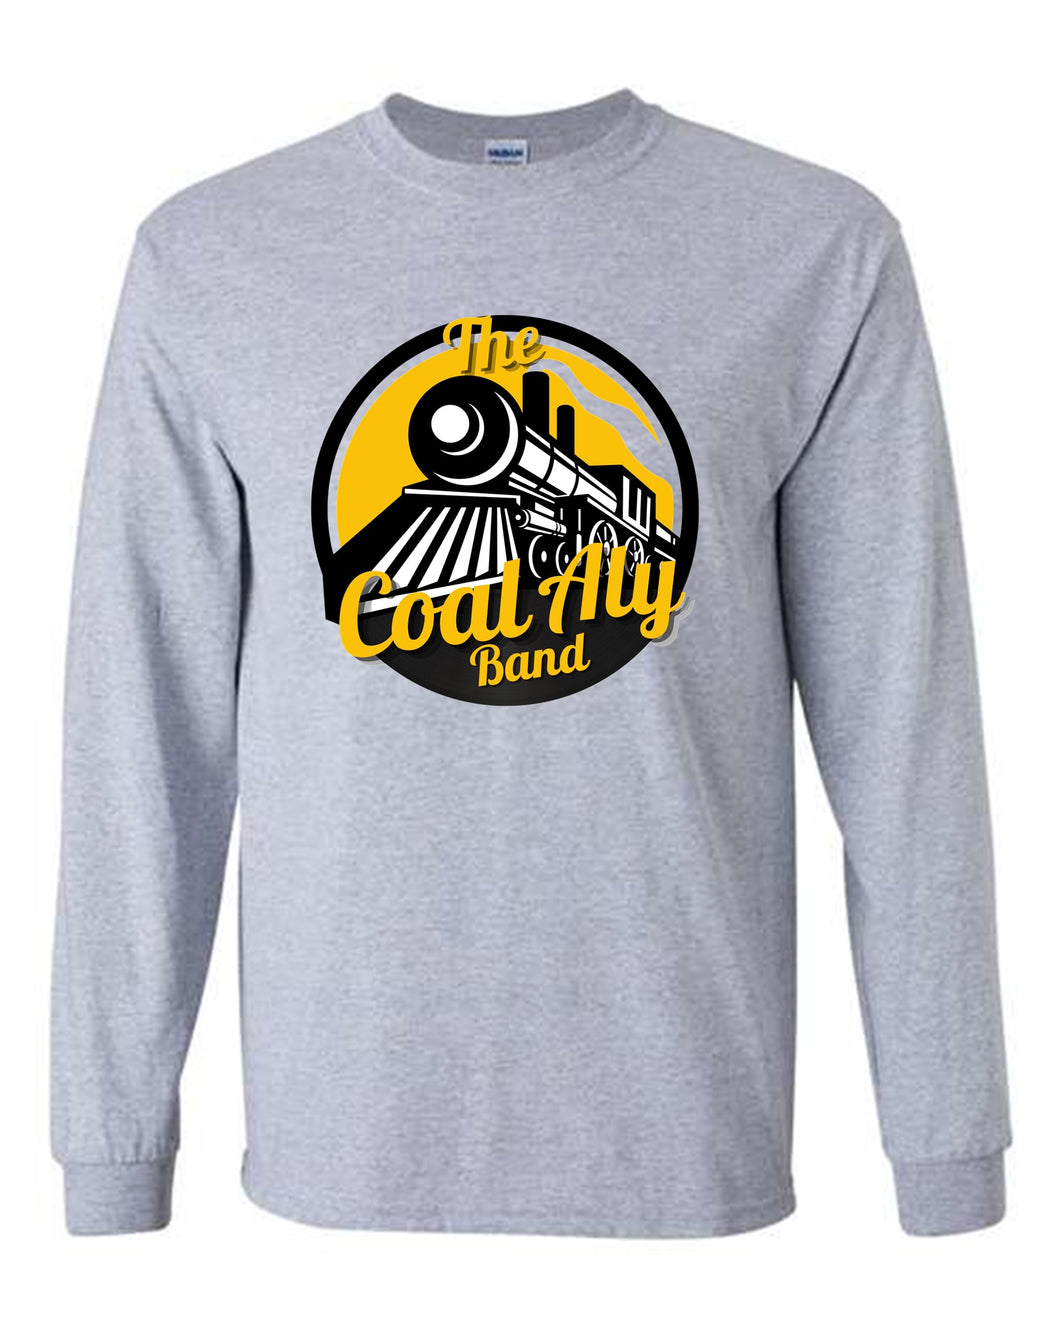 Coal Aly Band Long Sleeve (Add'l Color!)